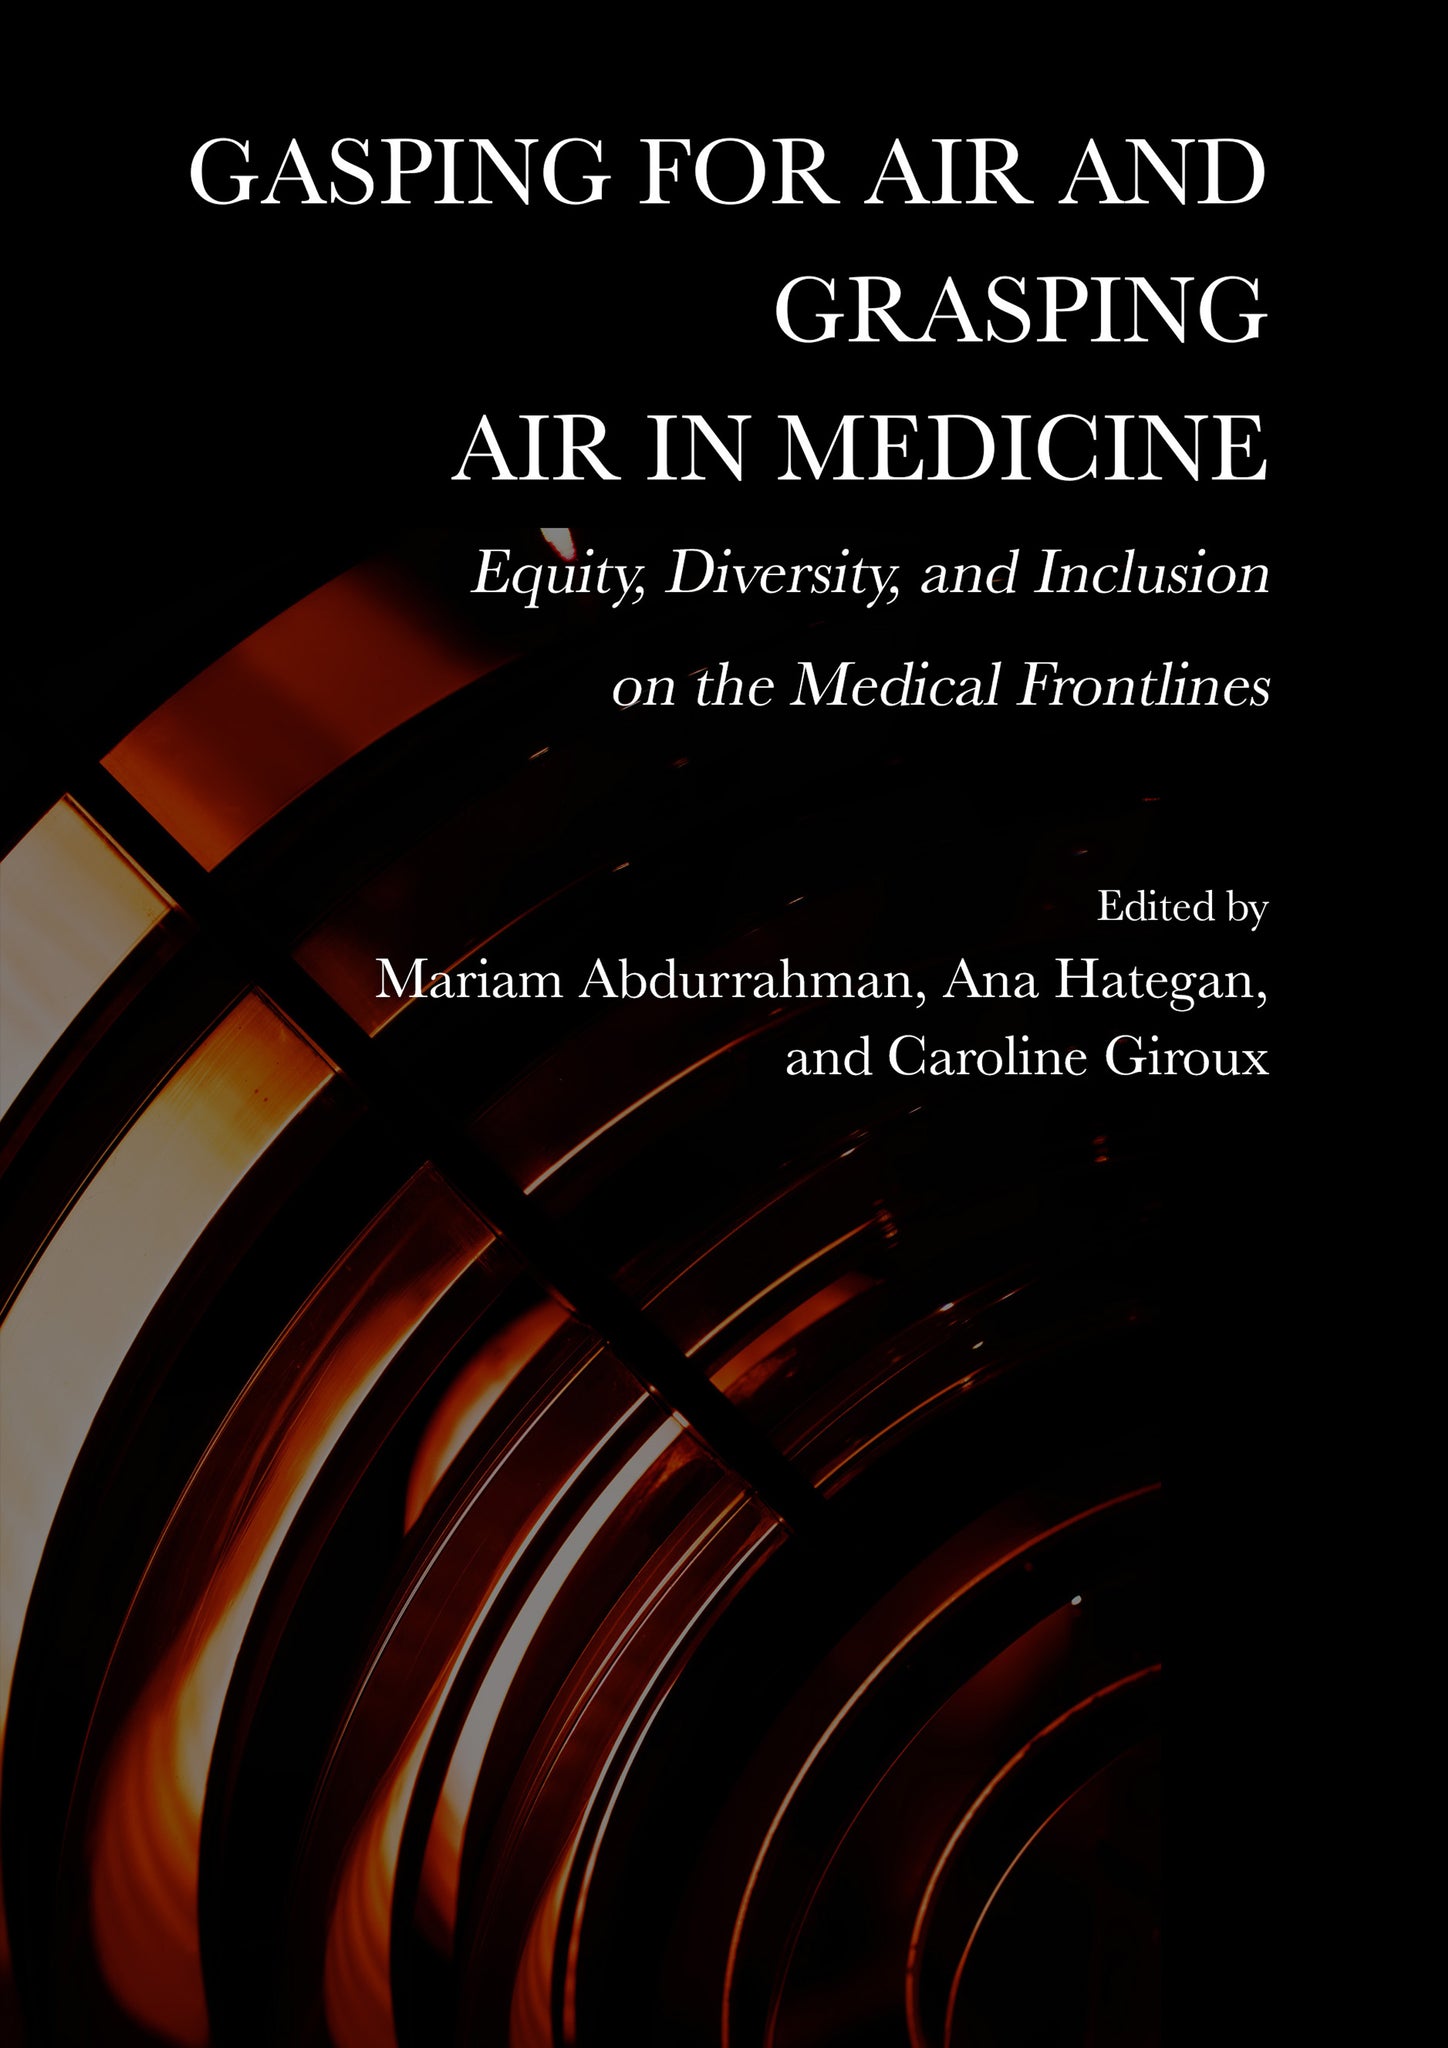 Gasping for Air and Grasping Air in Medicine: Equity, Diversity, and Inclusion on the Medical Frontlines